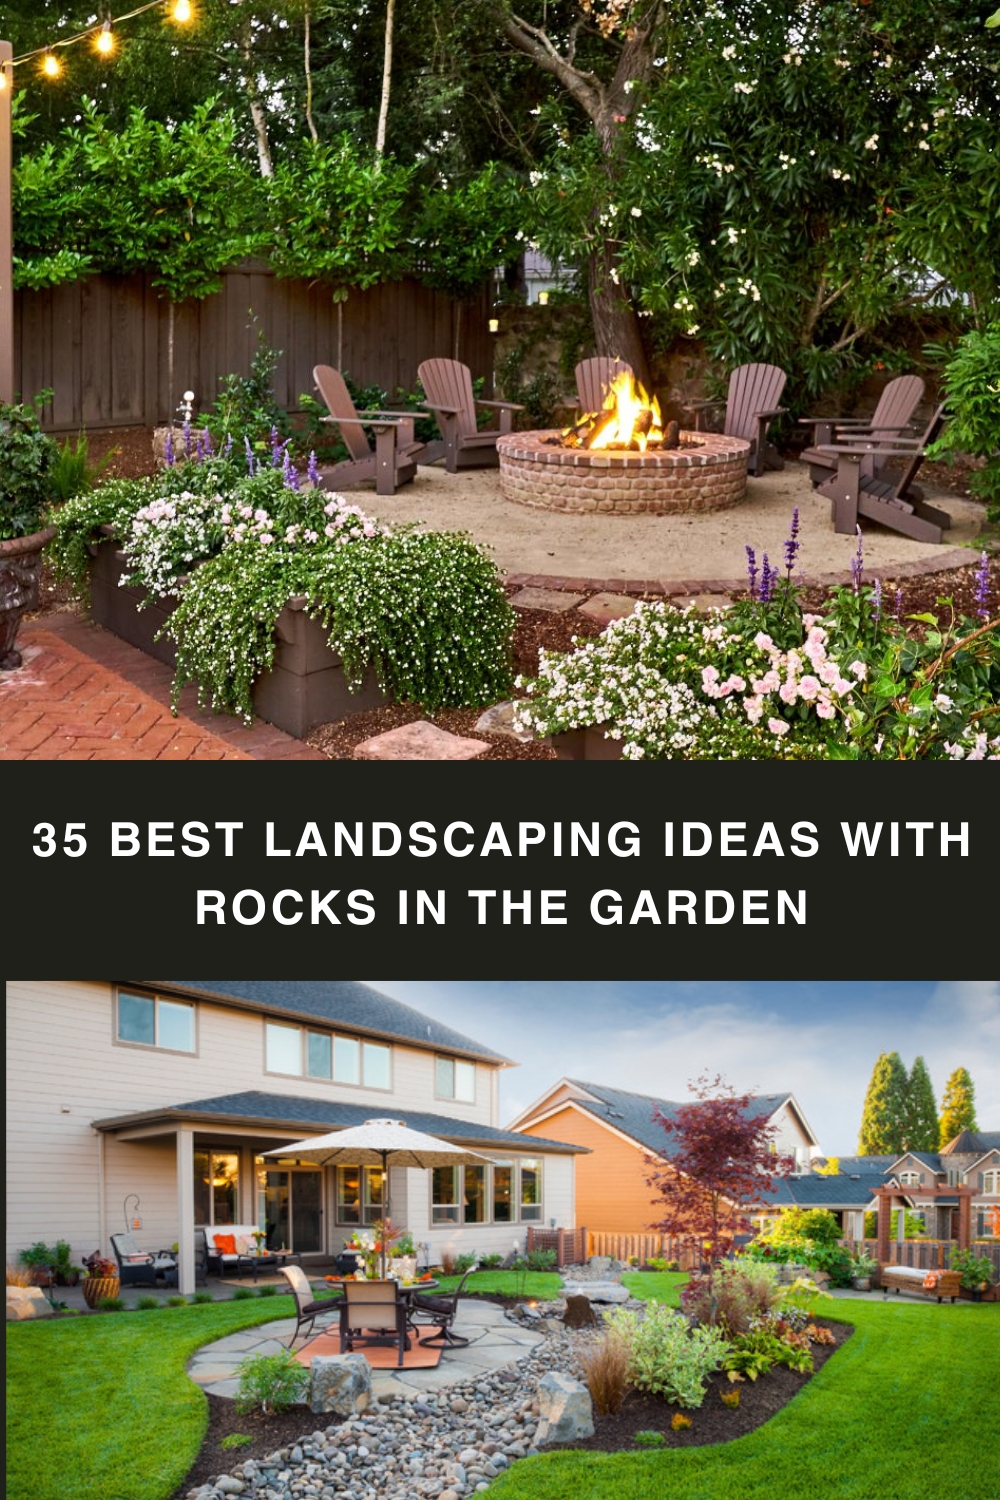 35 Best Landscaping Ideas with Rocks in the Garden pin